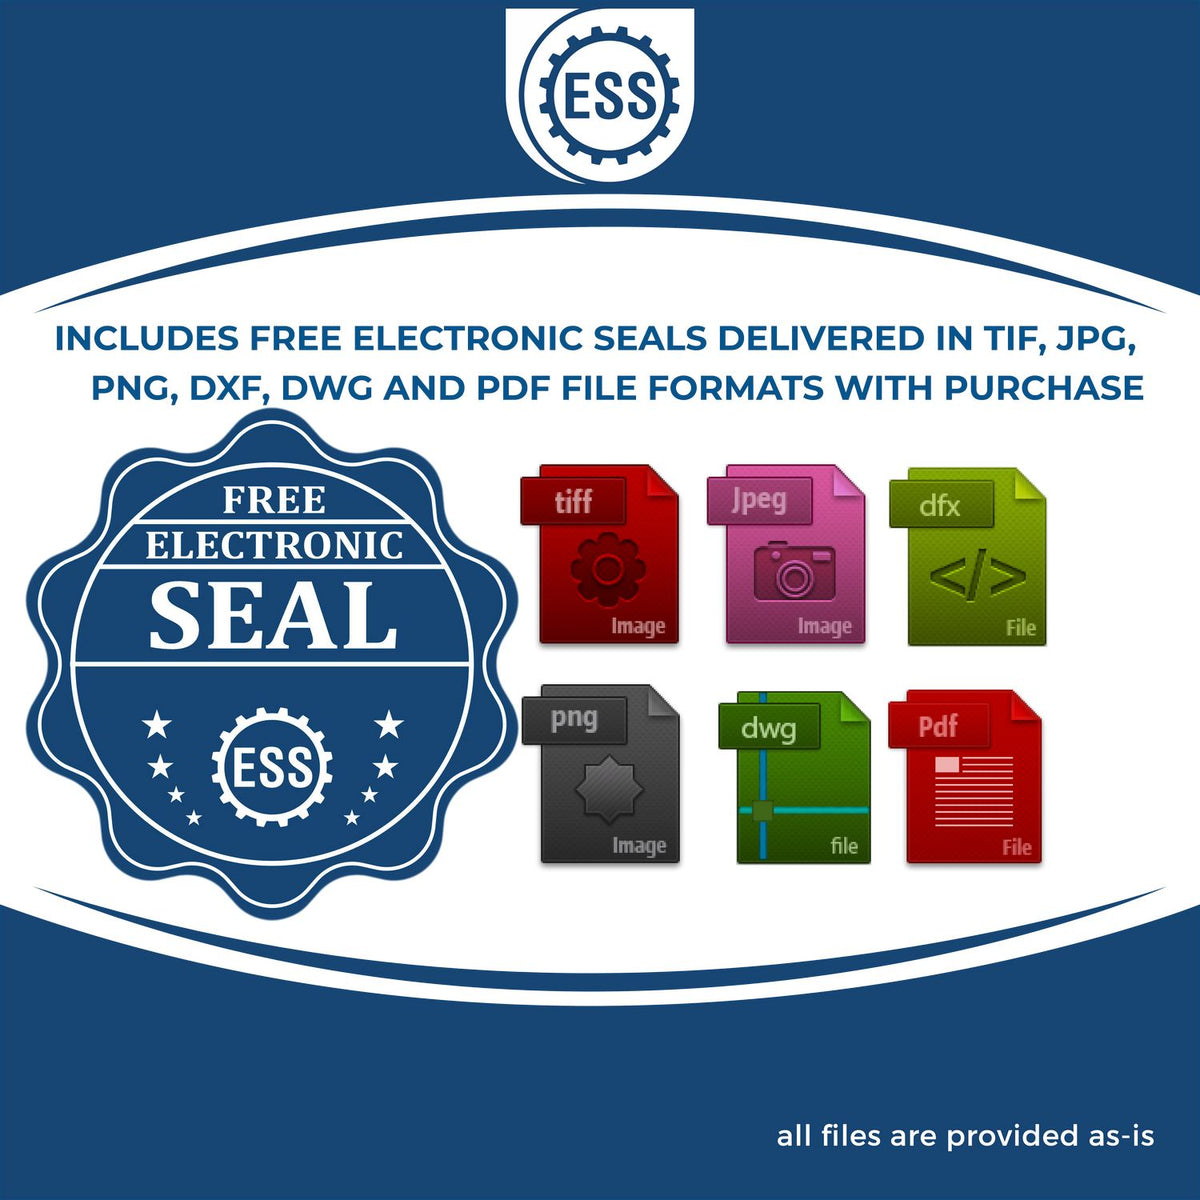 An infographic for the free electronic seal for the Maryland Desk Architect Embossing Seal illustrating the different file type icons such as DXF, DWG, TIF, JPG and PNG.